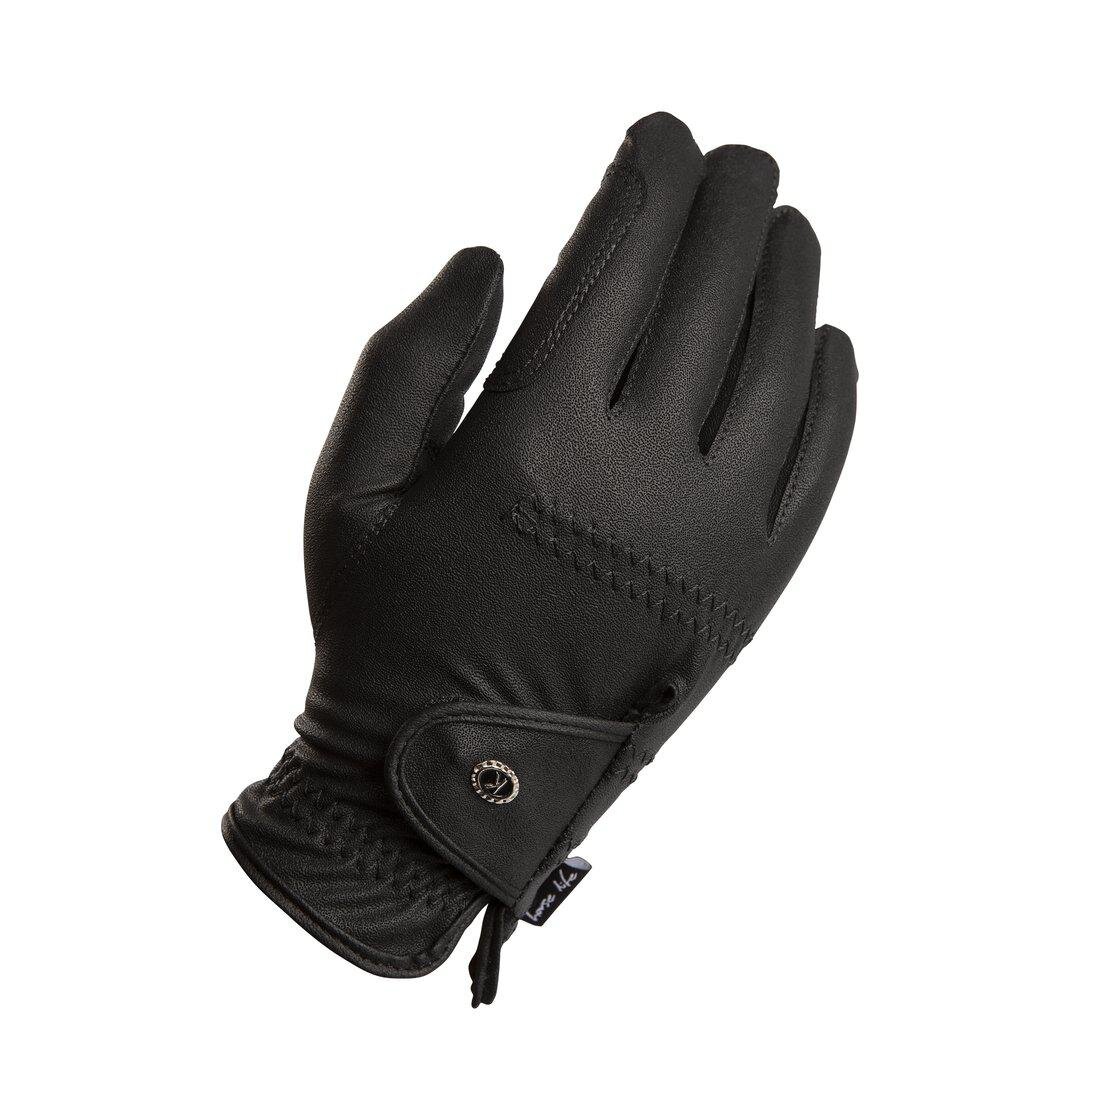 Synthetic Leather Riding Gloves - Black